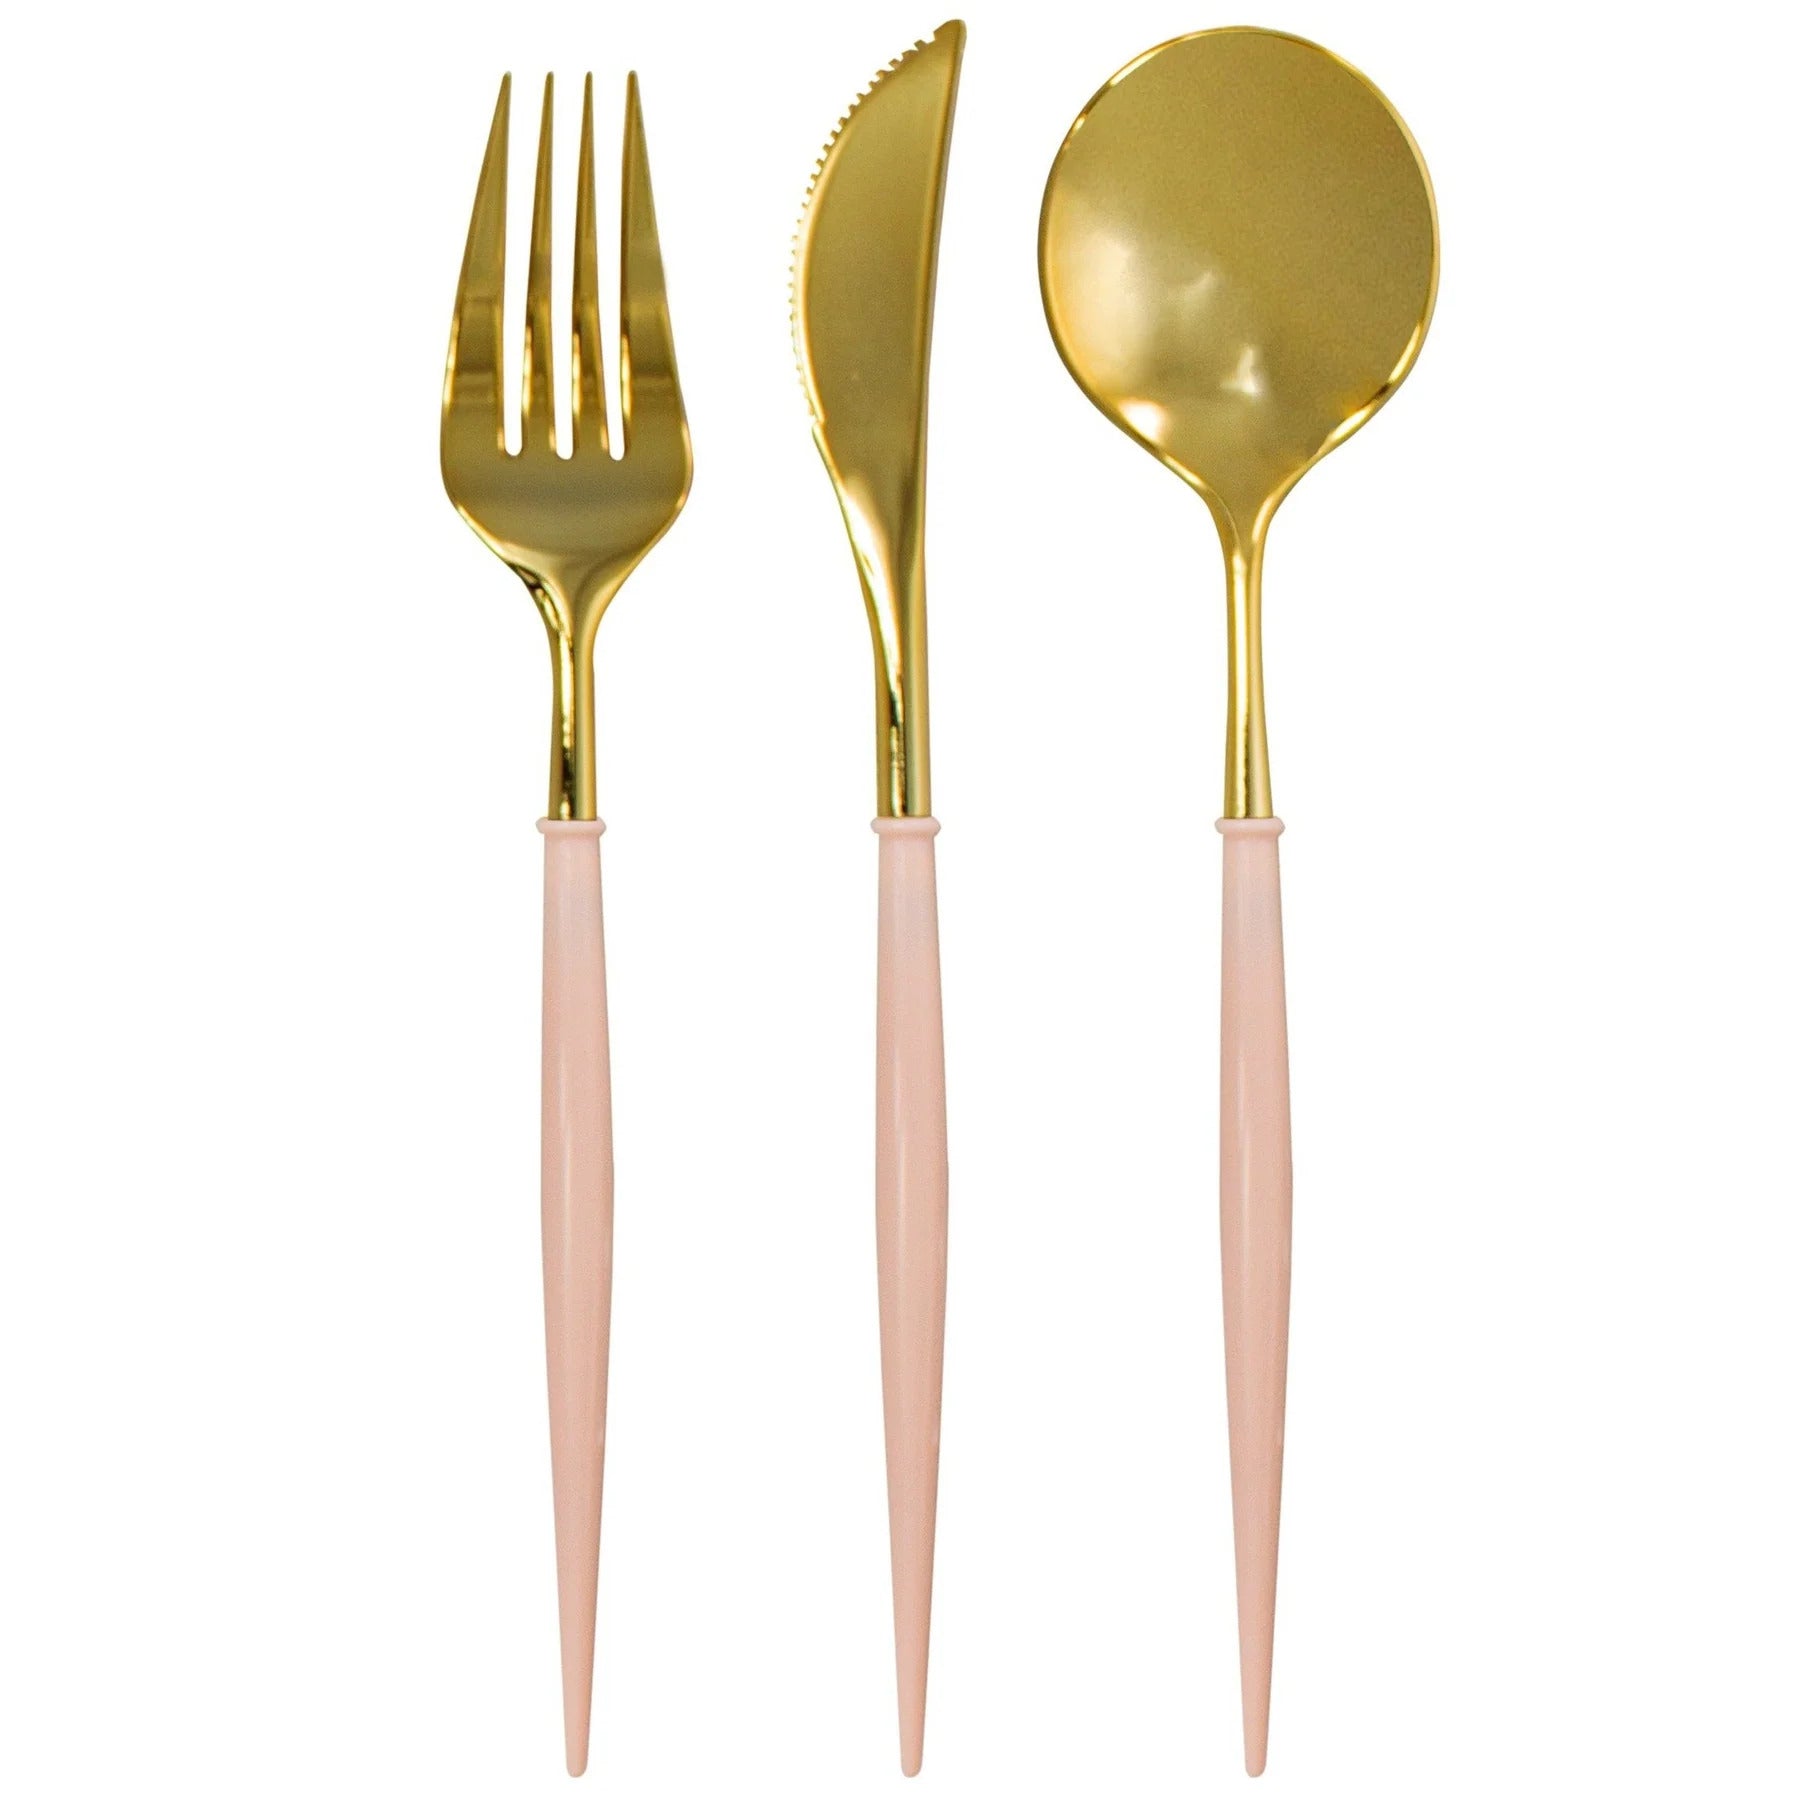 Bella Plastic Cutlery in Gold and Pink by Sophistiplate, featuring a spoon, fork, and knife, ideal for elevating any table setting or event.